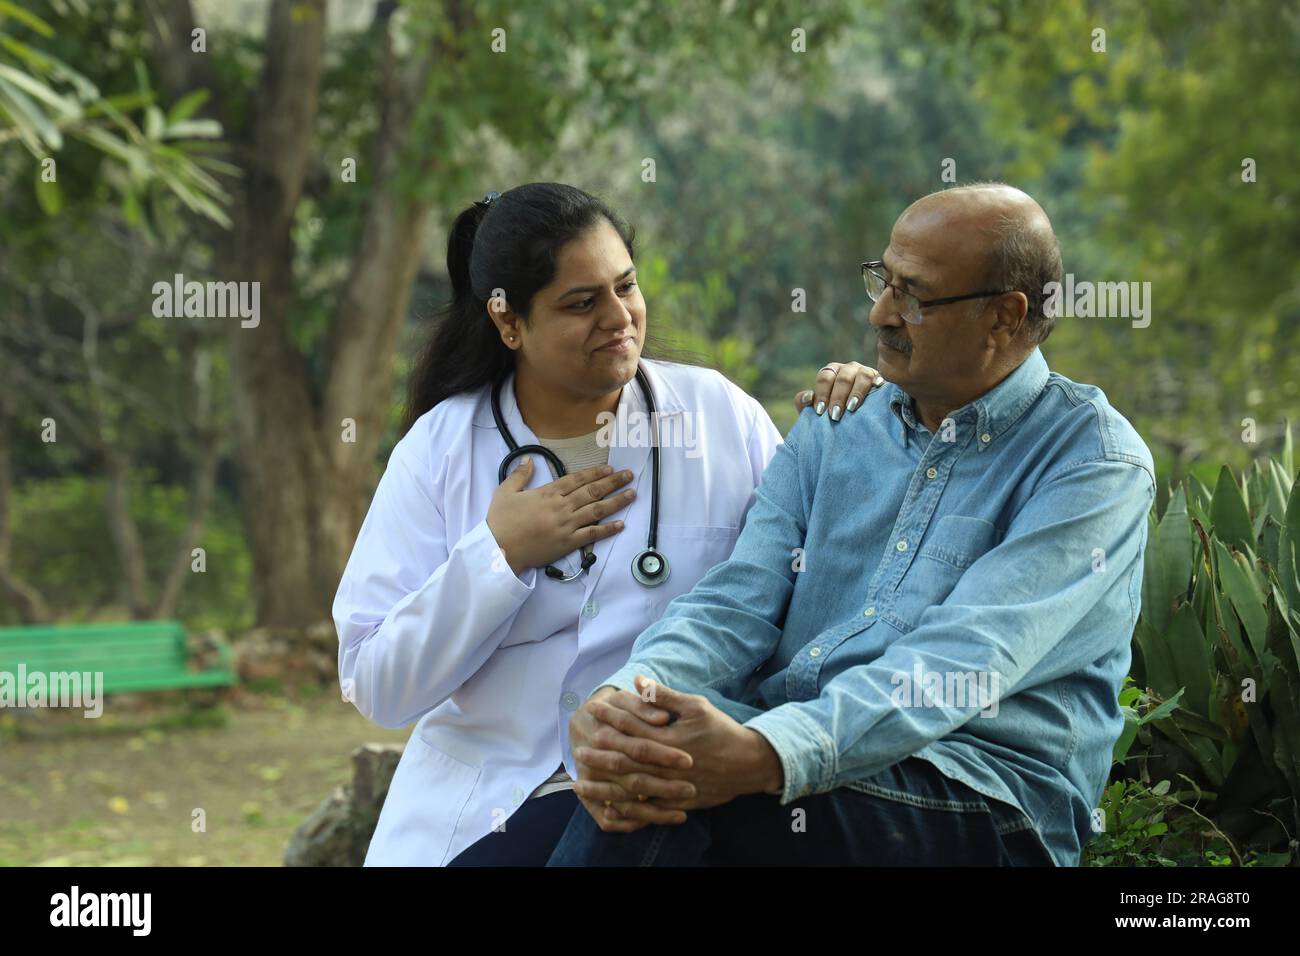 Female Indian doctor examining the senior patient in the city park in afternoon. Stock Photo